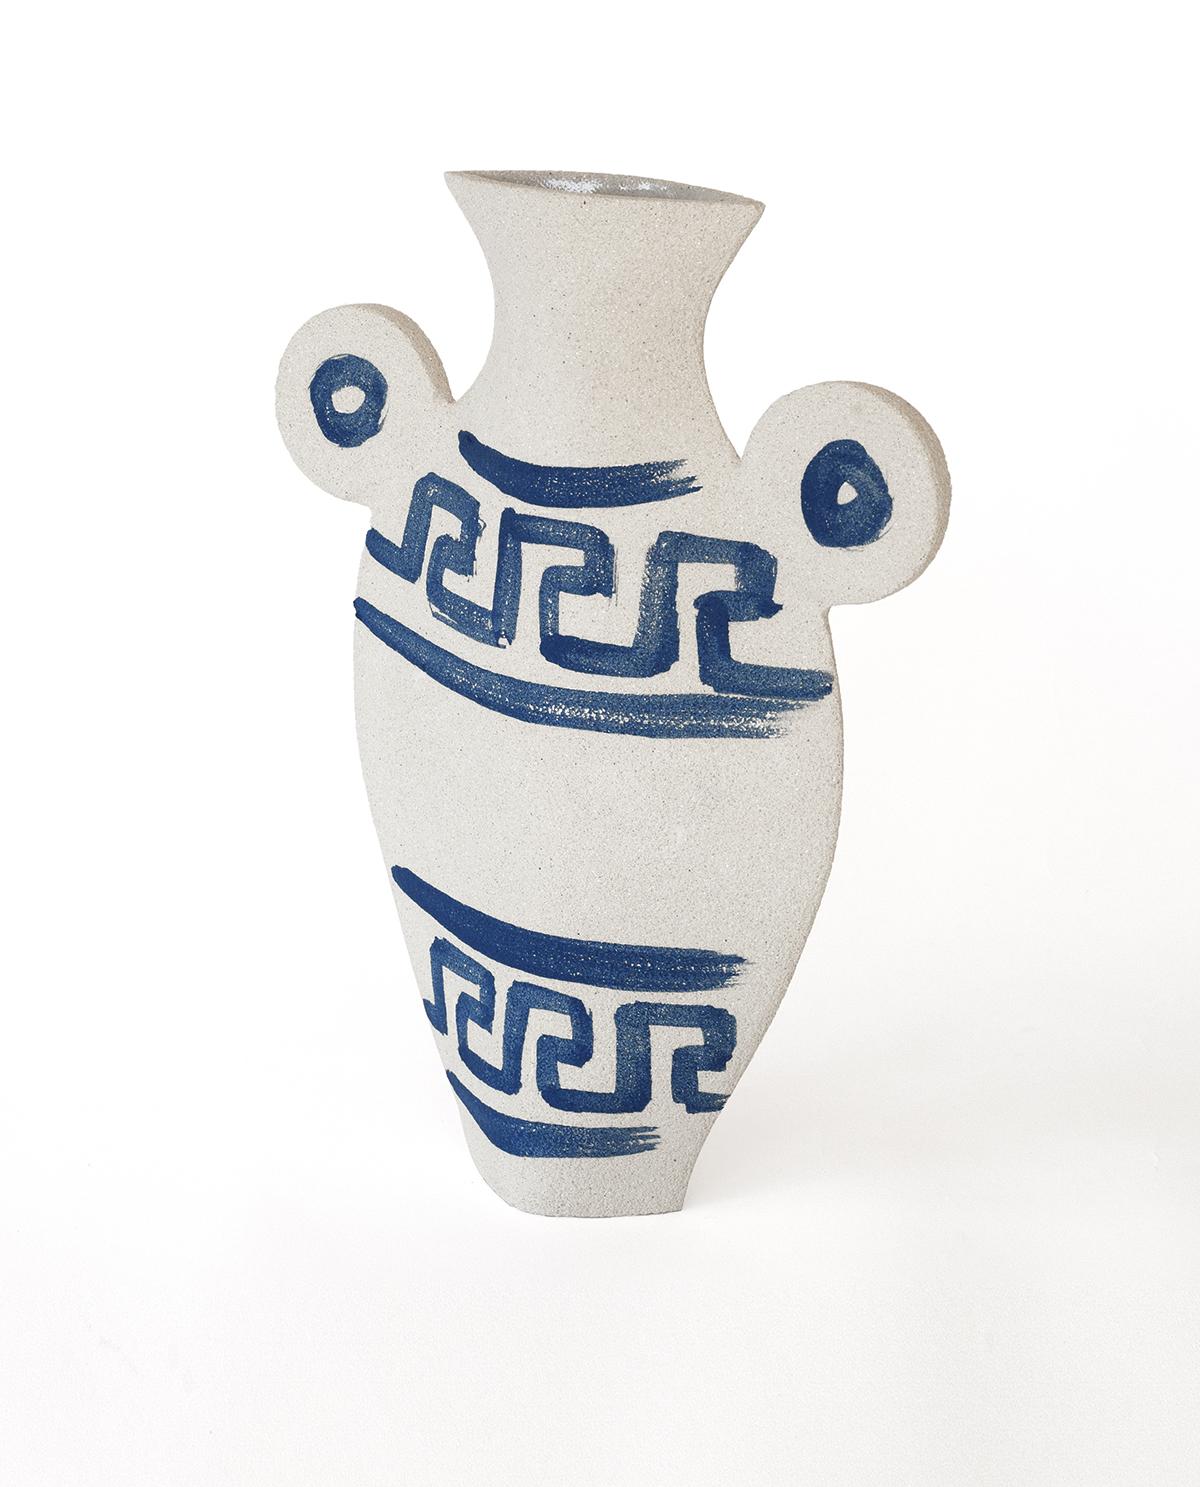 A part of a captivating triptych blending ancient Greek pottery with contemporary design, the ‘Greek [L]’ vase showcases delicate blue underglaze illustrations that harmonize traditional and modern aesthetics.
Crafted by our designer, the blue